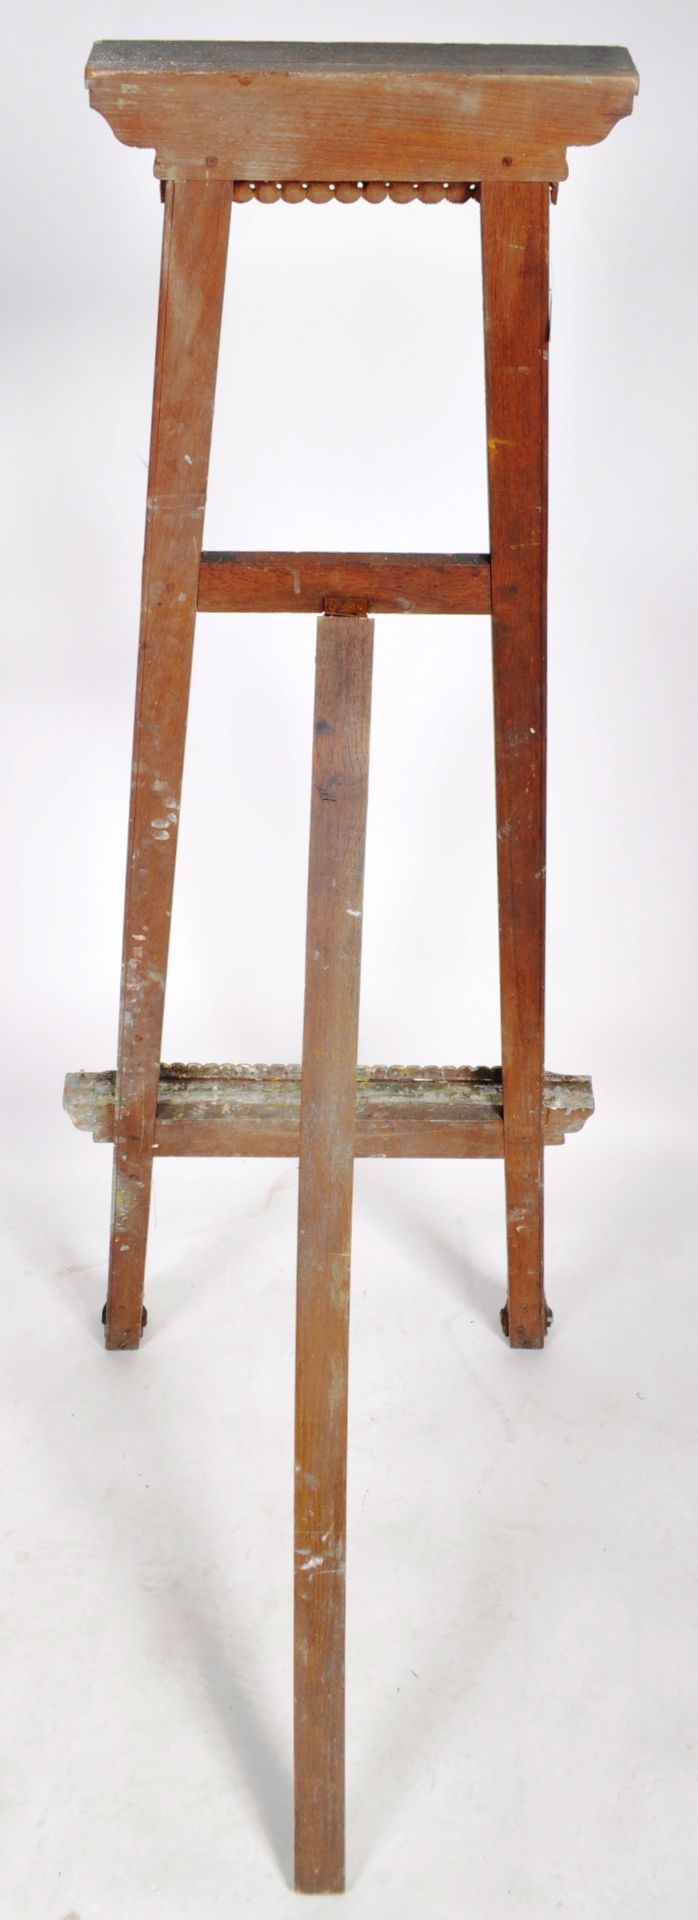 VINTAGE 20TH CENTURY ORIENTAL CARVED WOOD EASEL STAND - Image 13 of 13